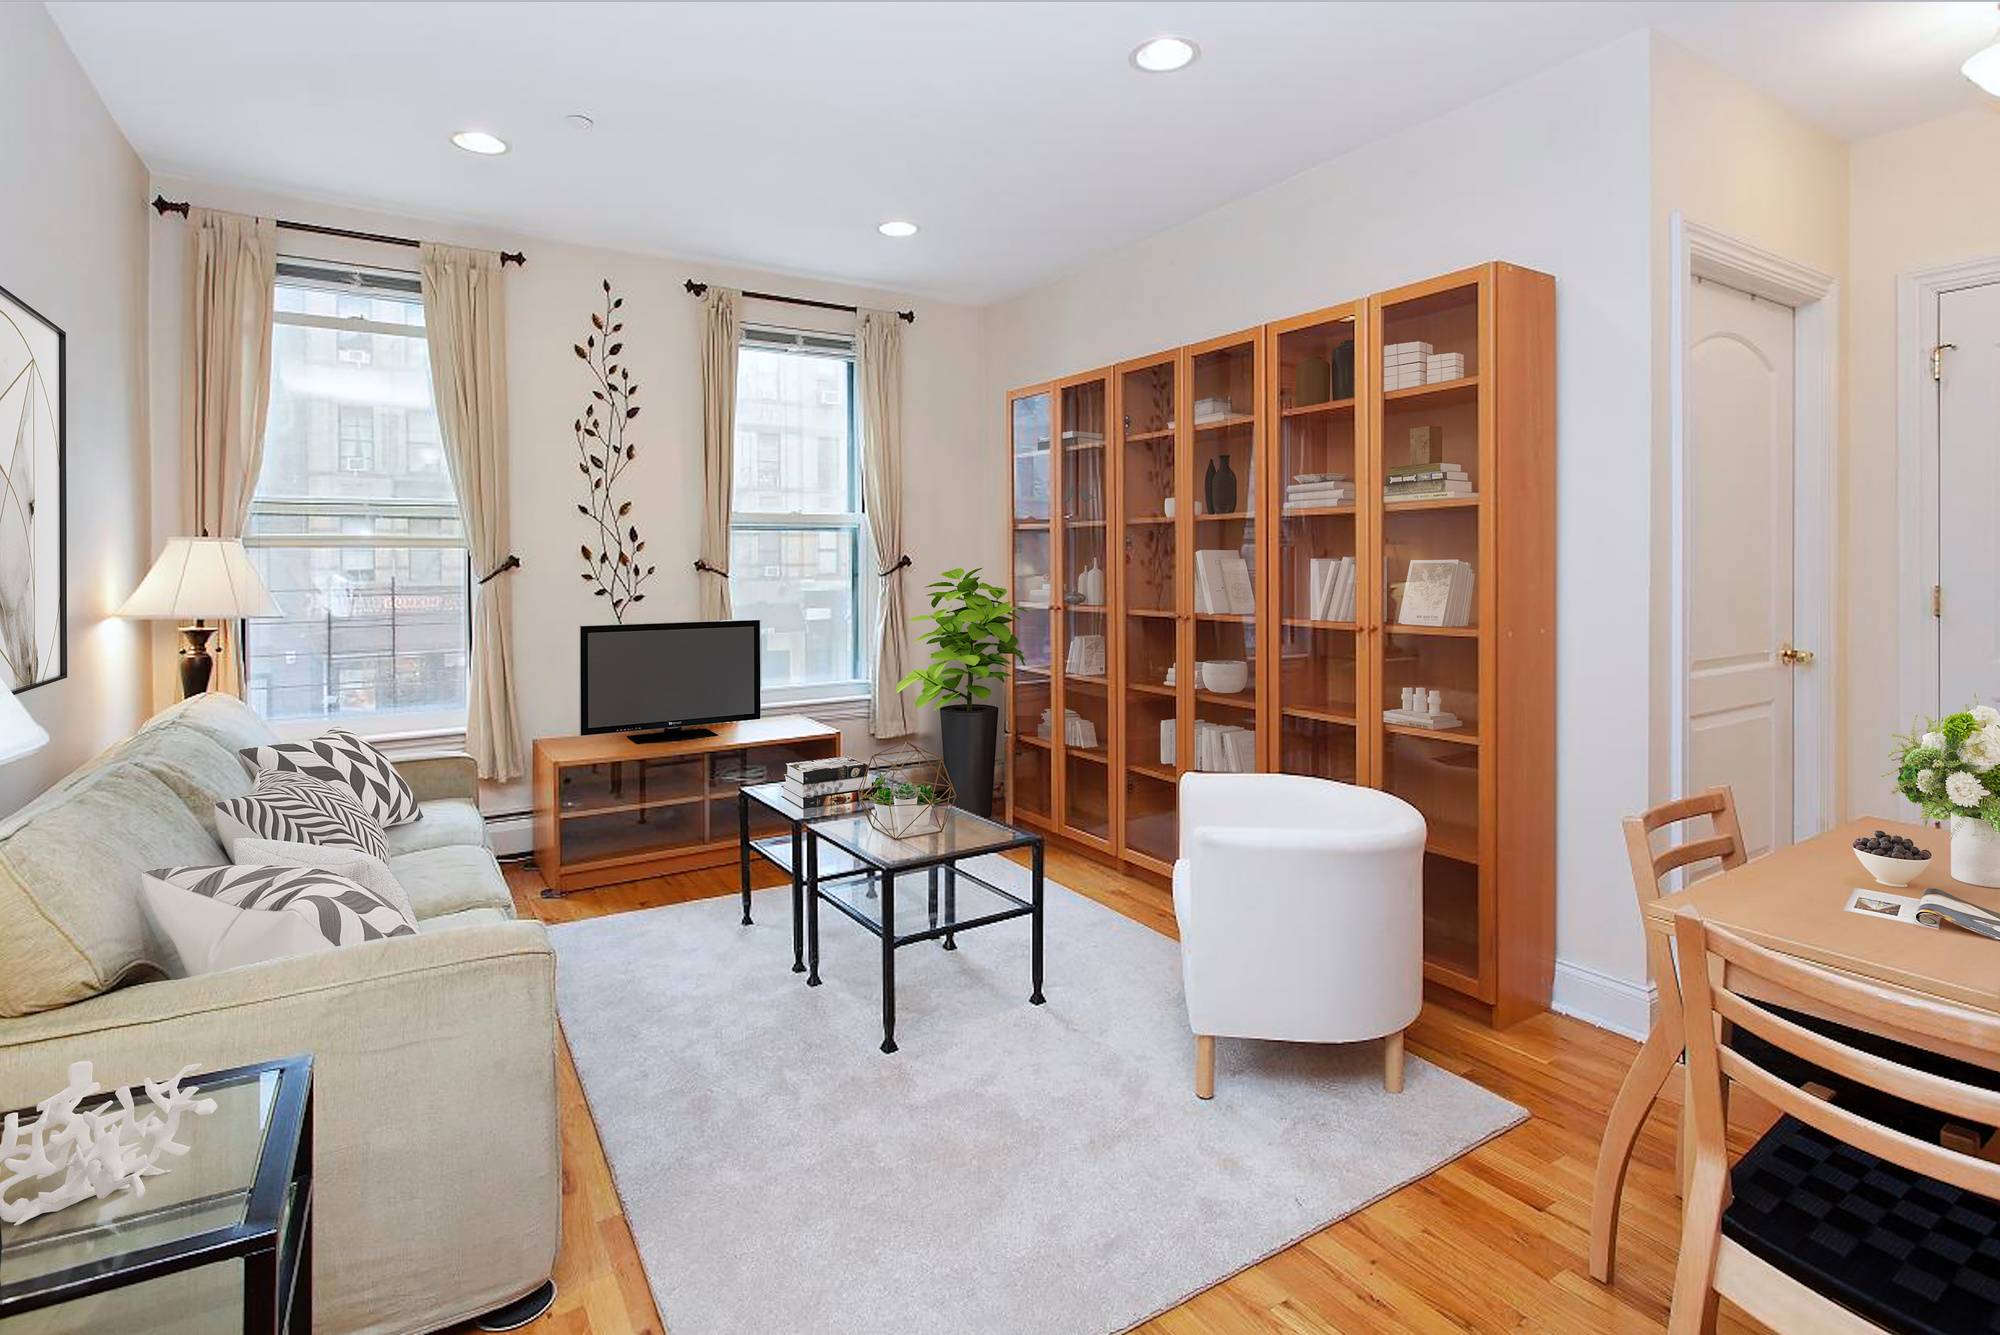 LIVE NEAR CENTRAL PARK ! Perfectly located just 3 blocks from Central Park, this one bedroom condo is possibly the best value in South Harlem !